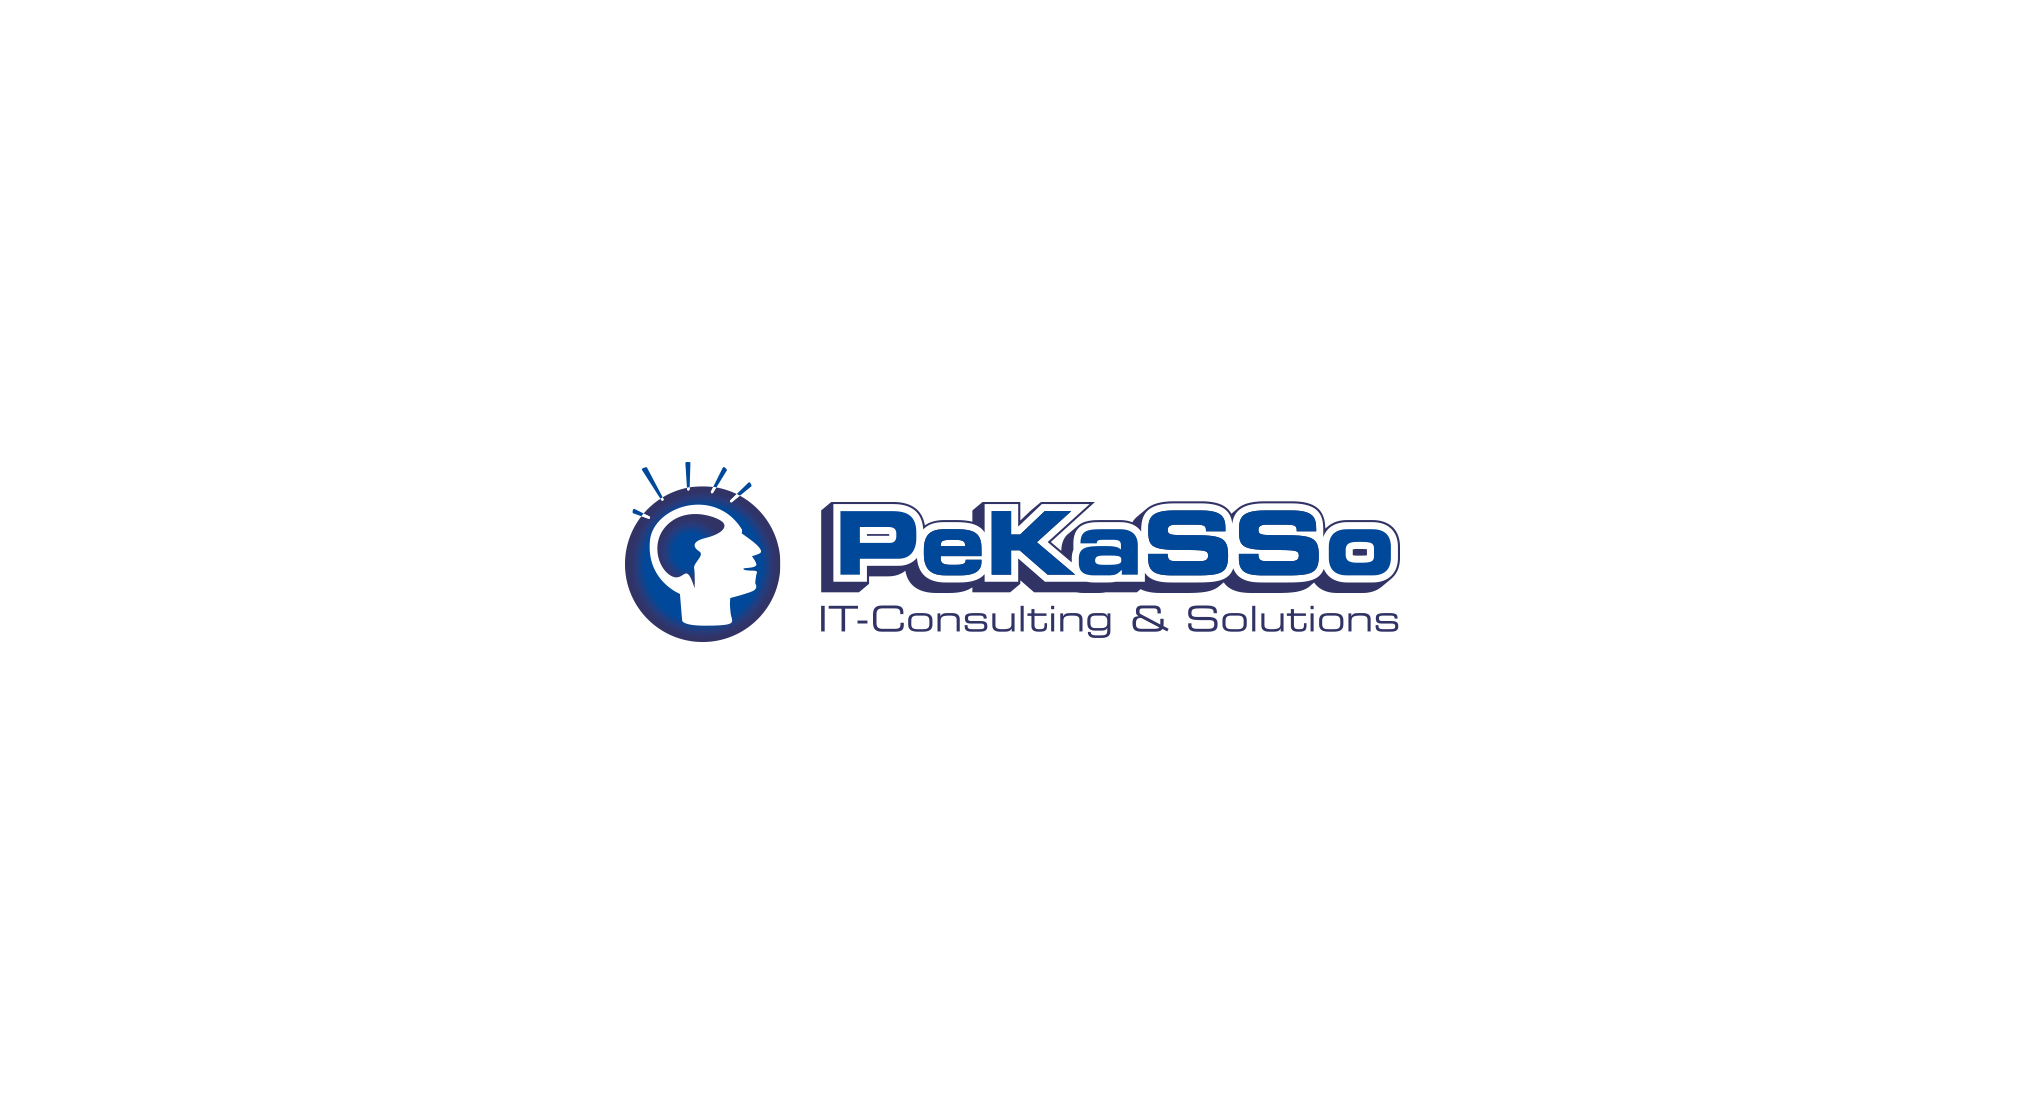 Pekasso, IT Consulting and Solutions